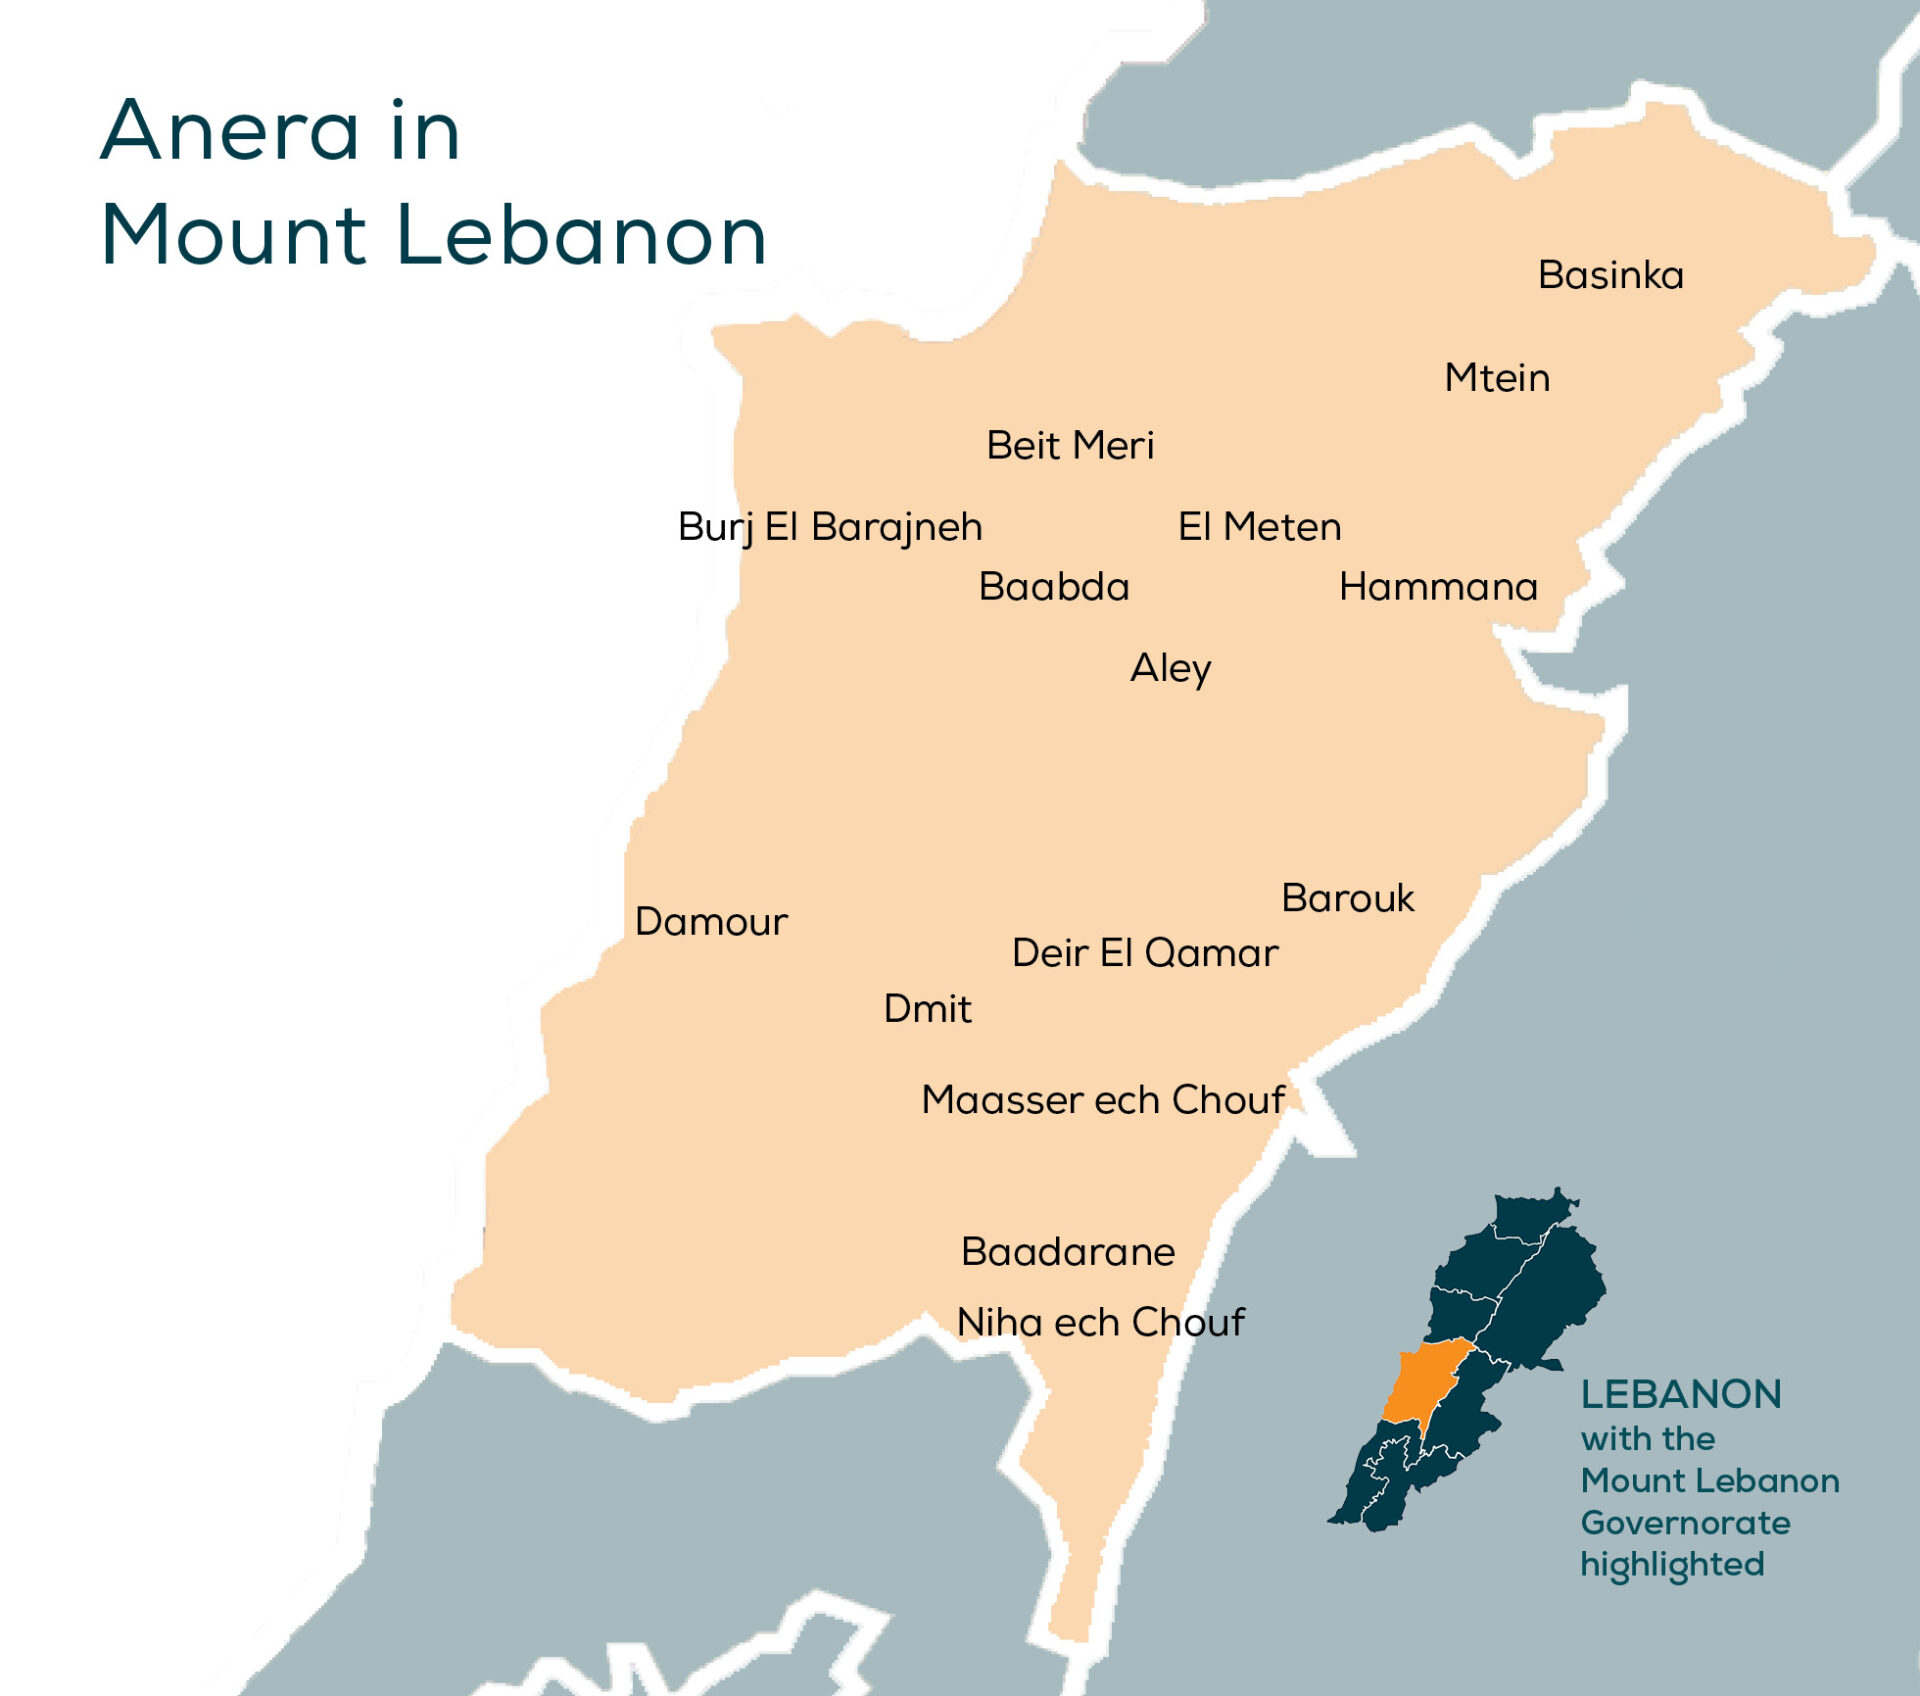 Map of the Mount Lebanon Governorate showing the places where Anera has worked.